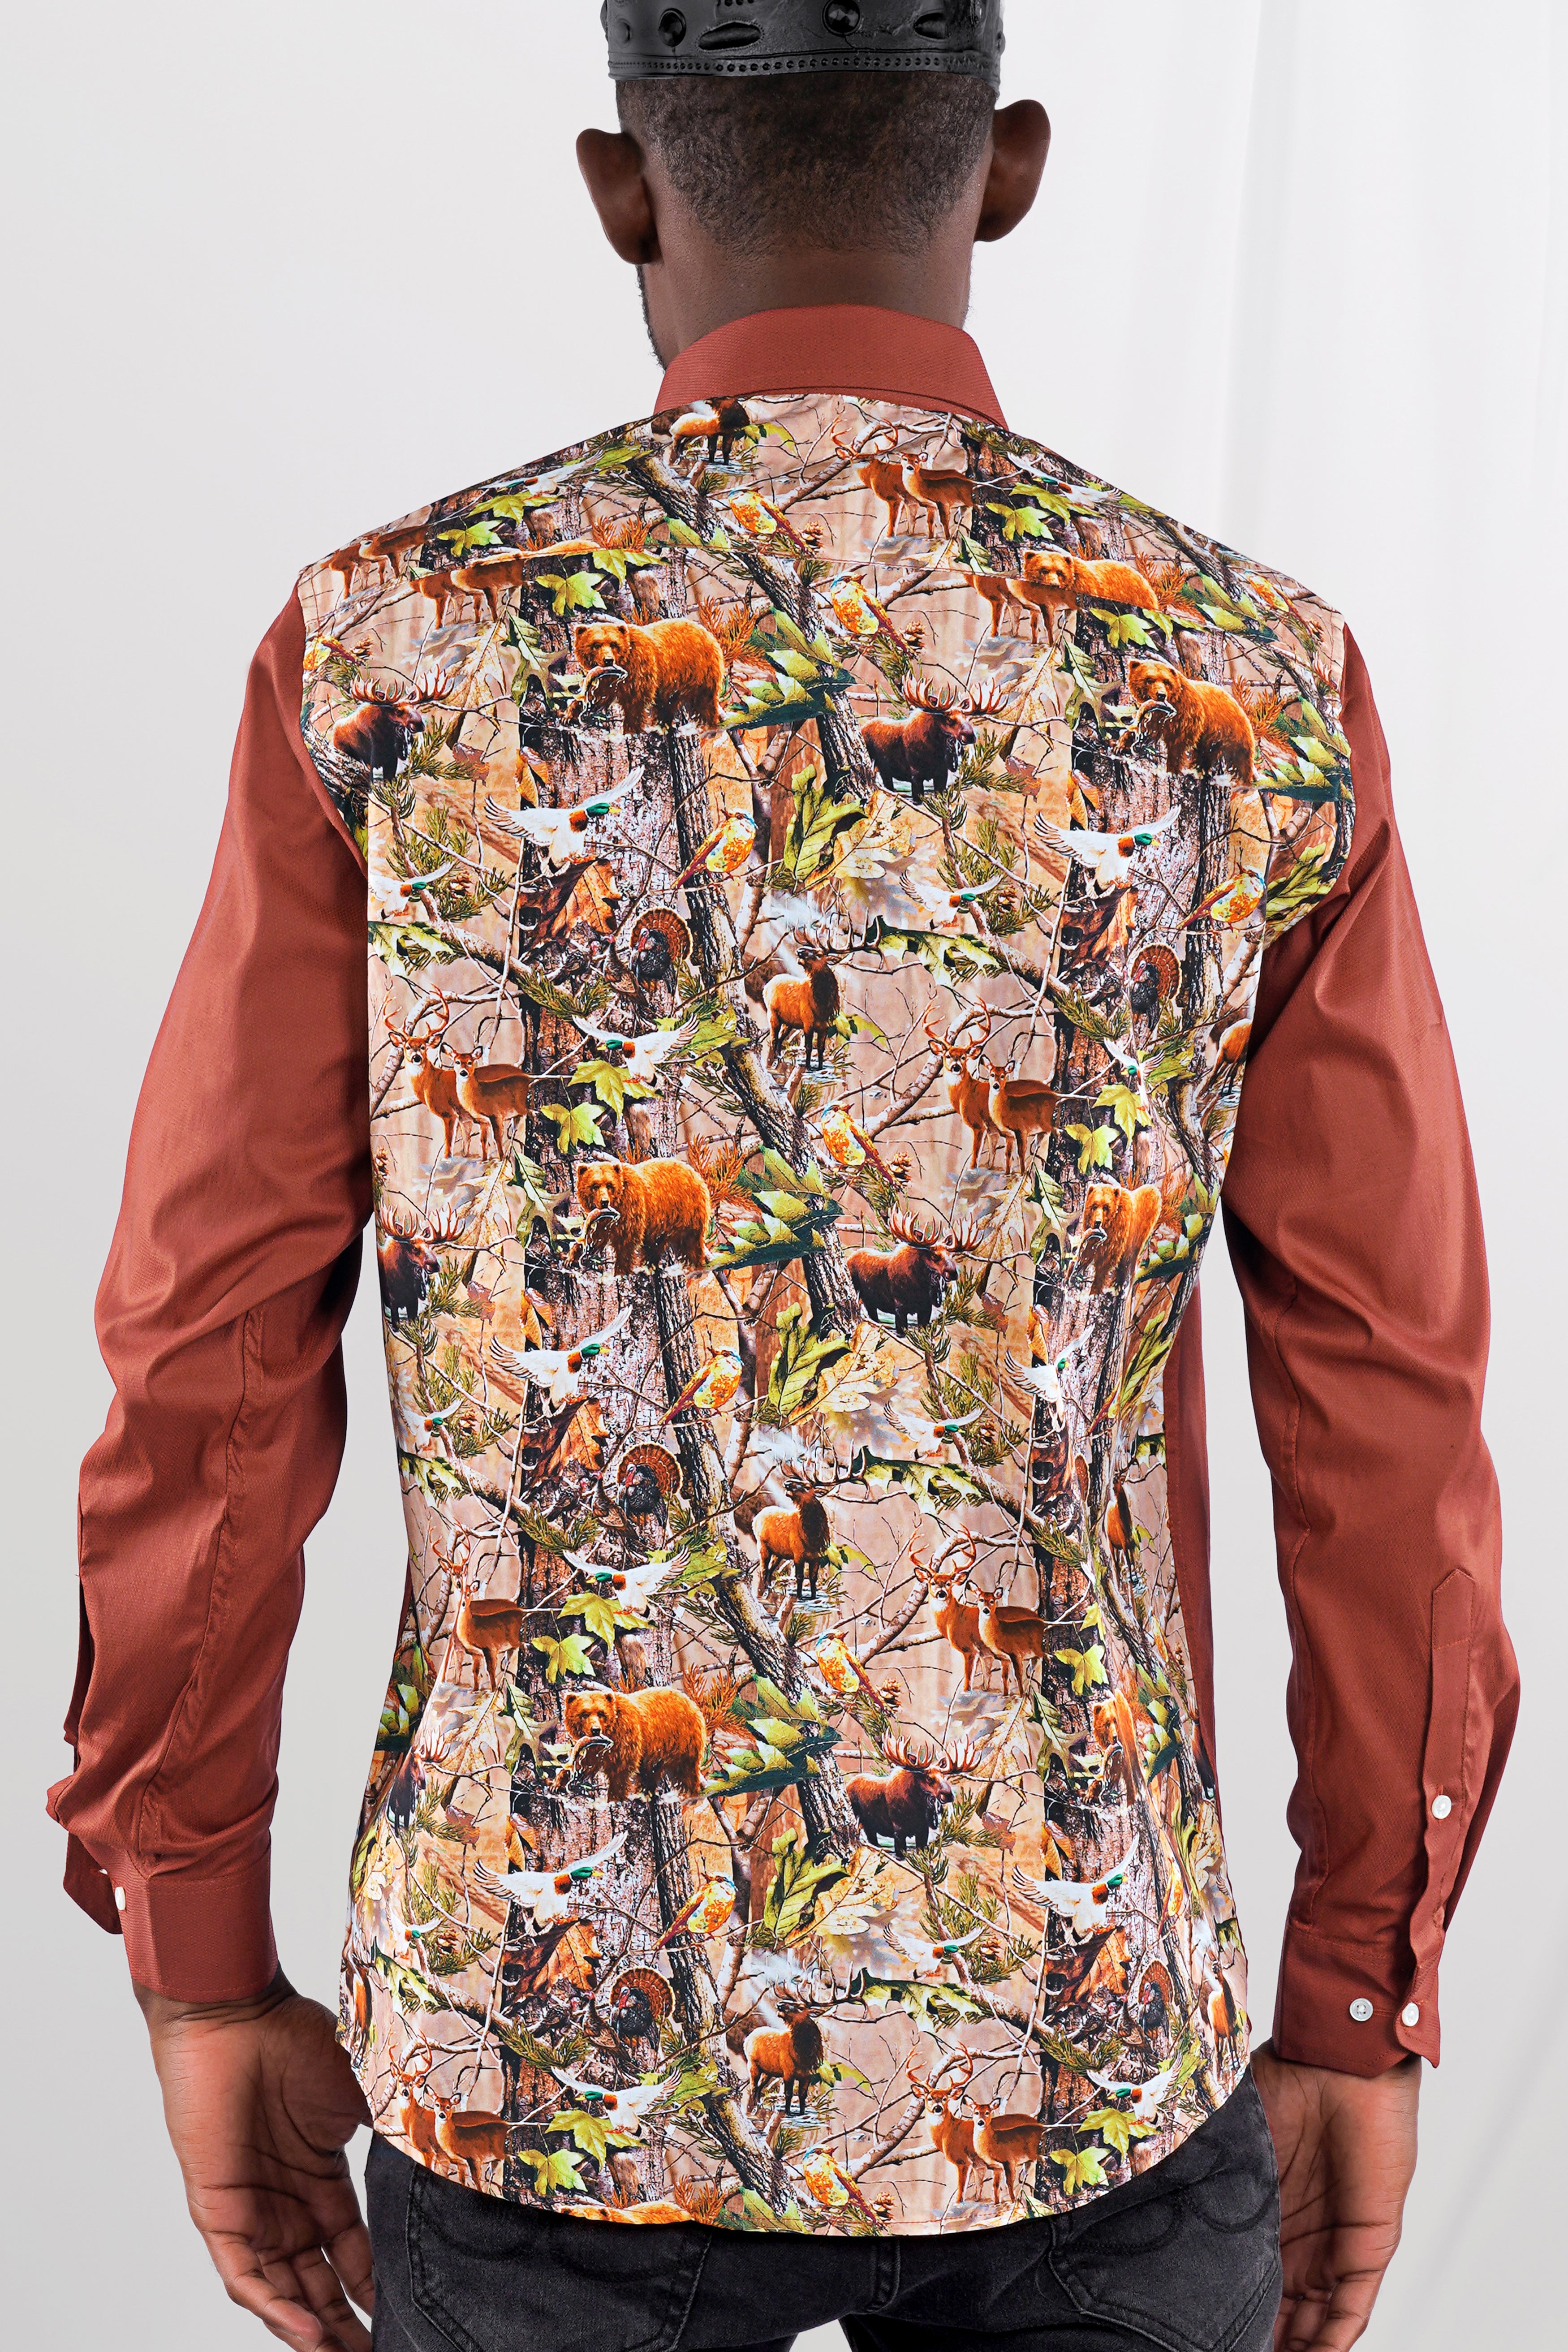 Sepia Rose with Back Tropical Printed Dobby Textured Designer Shirt